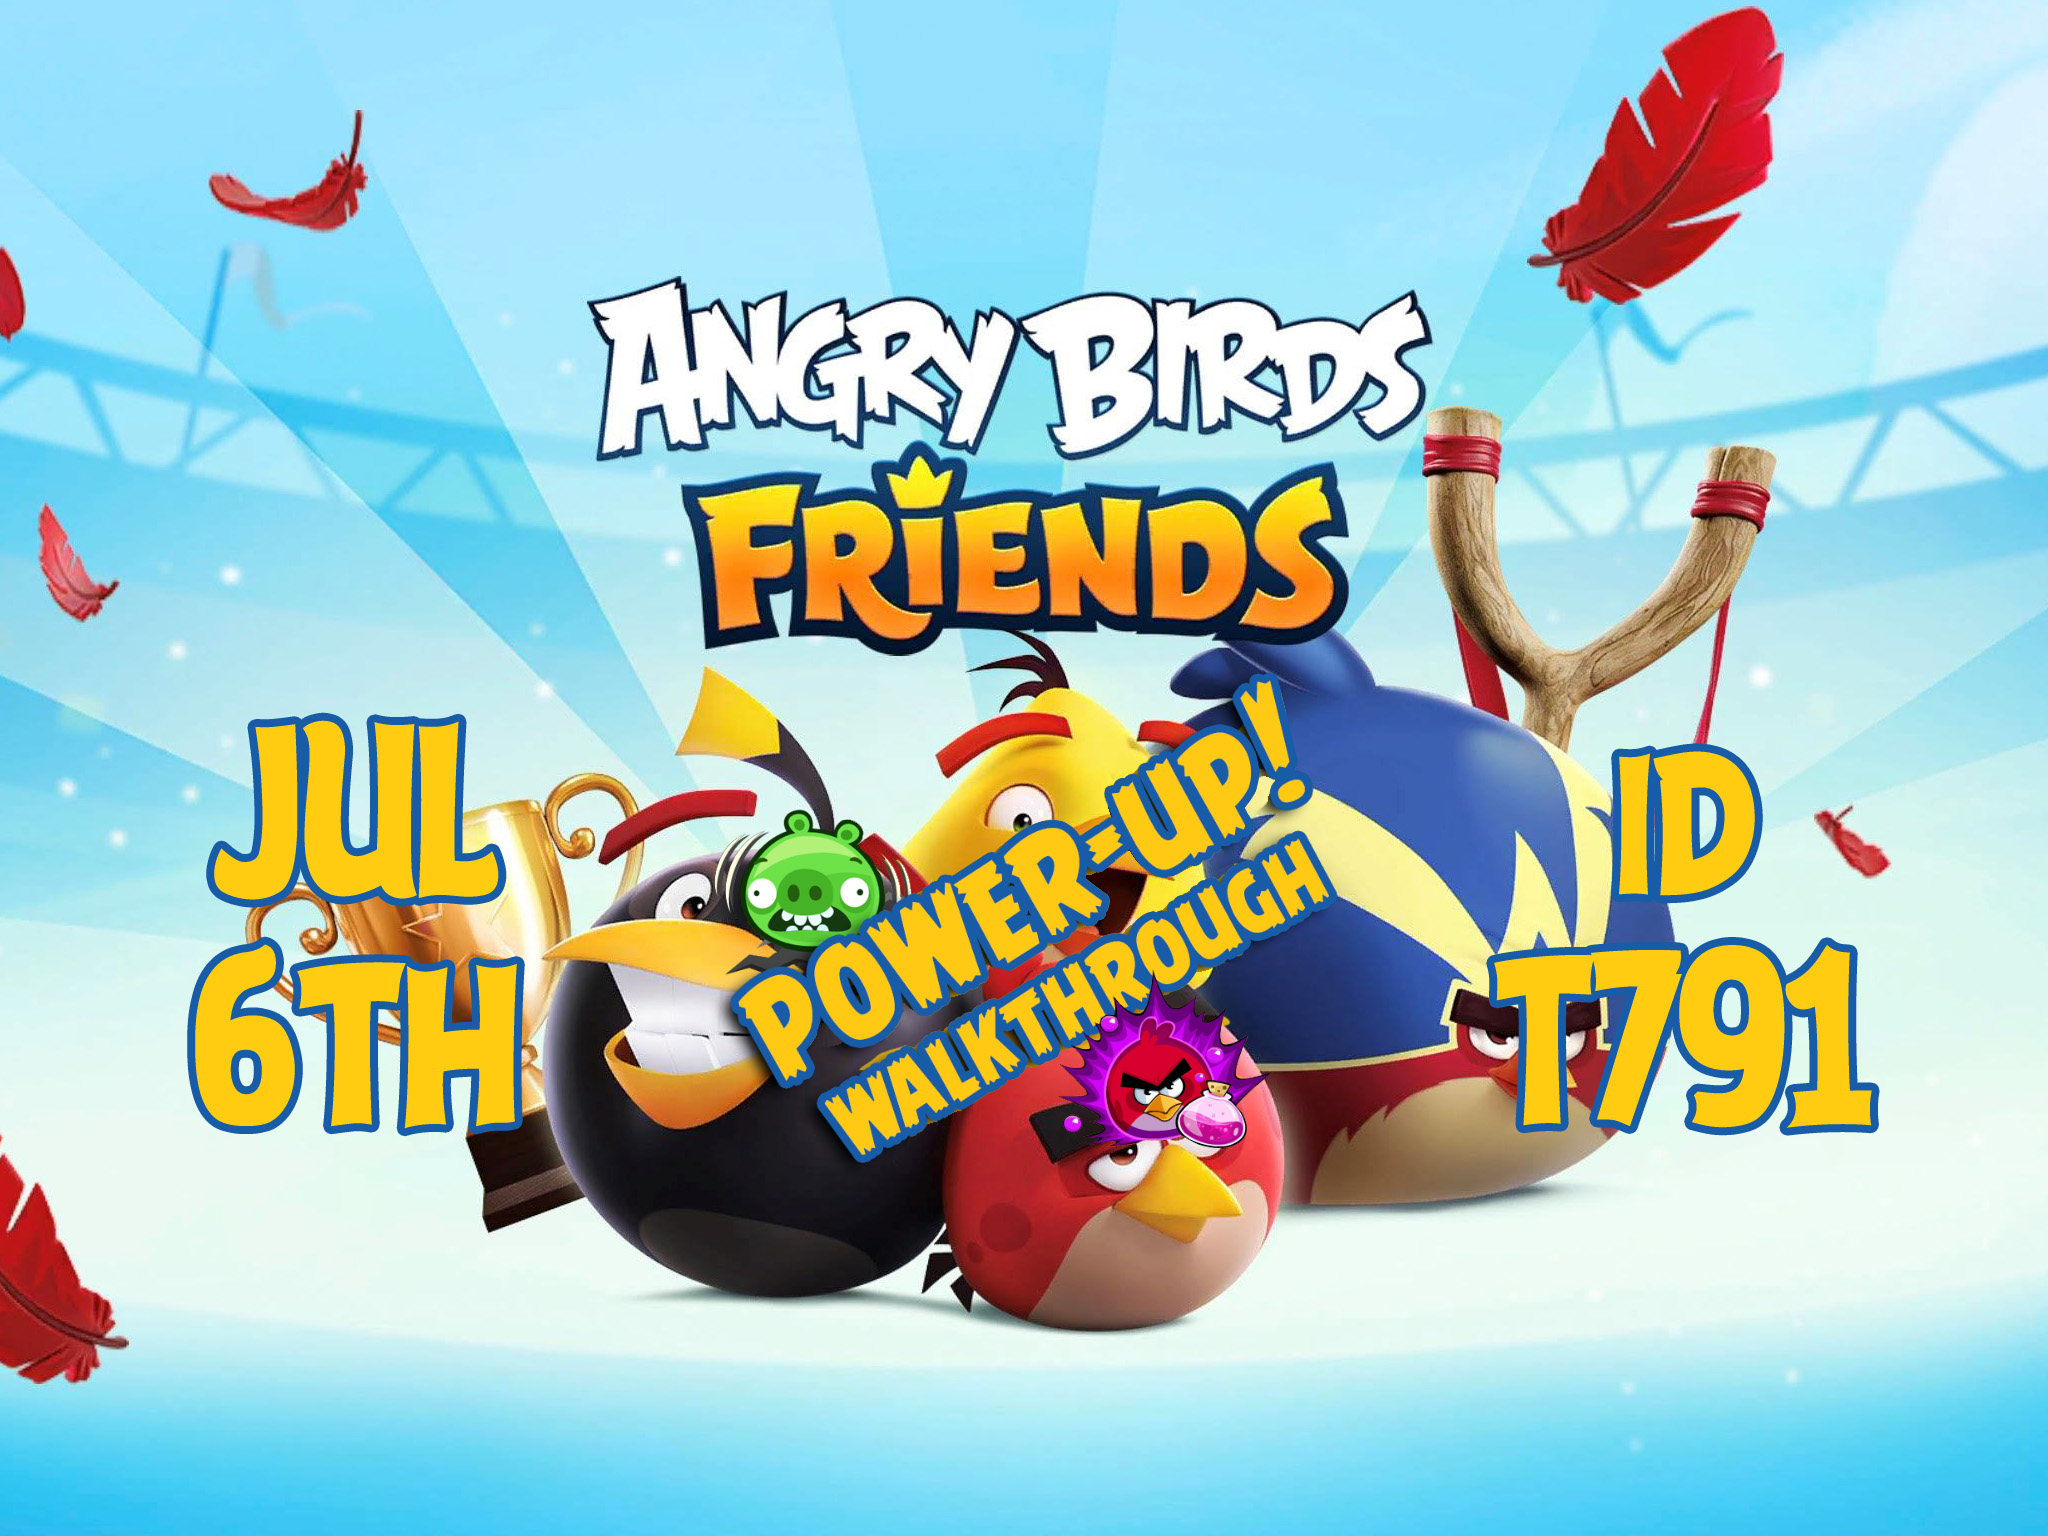 Angry-Birds-Friends-Tournament-T791-Feature-Image-PU